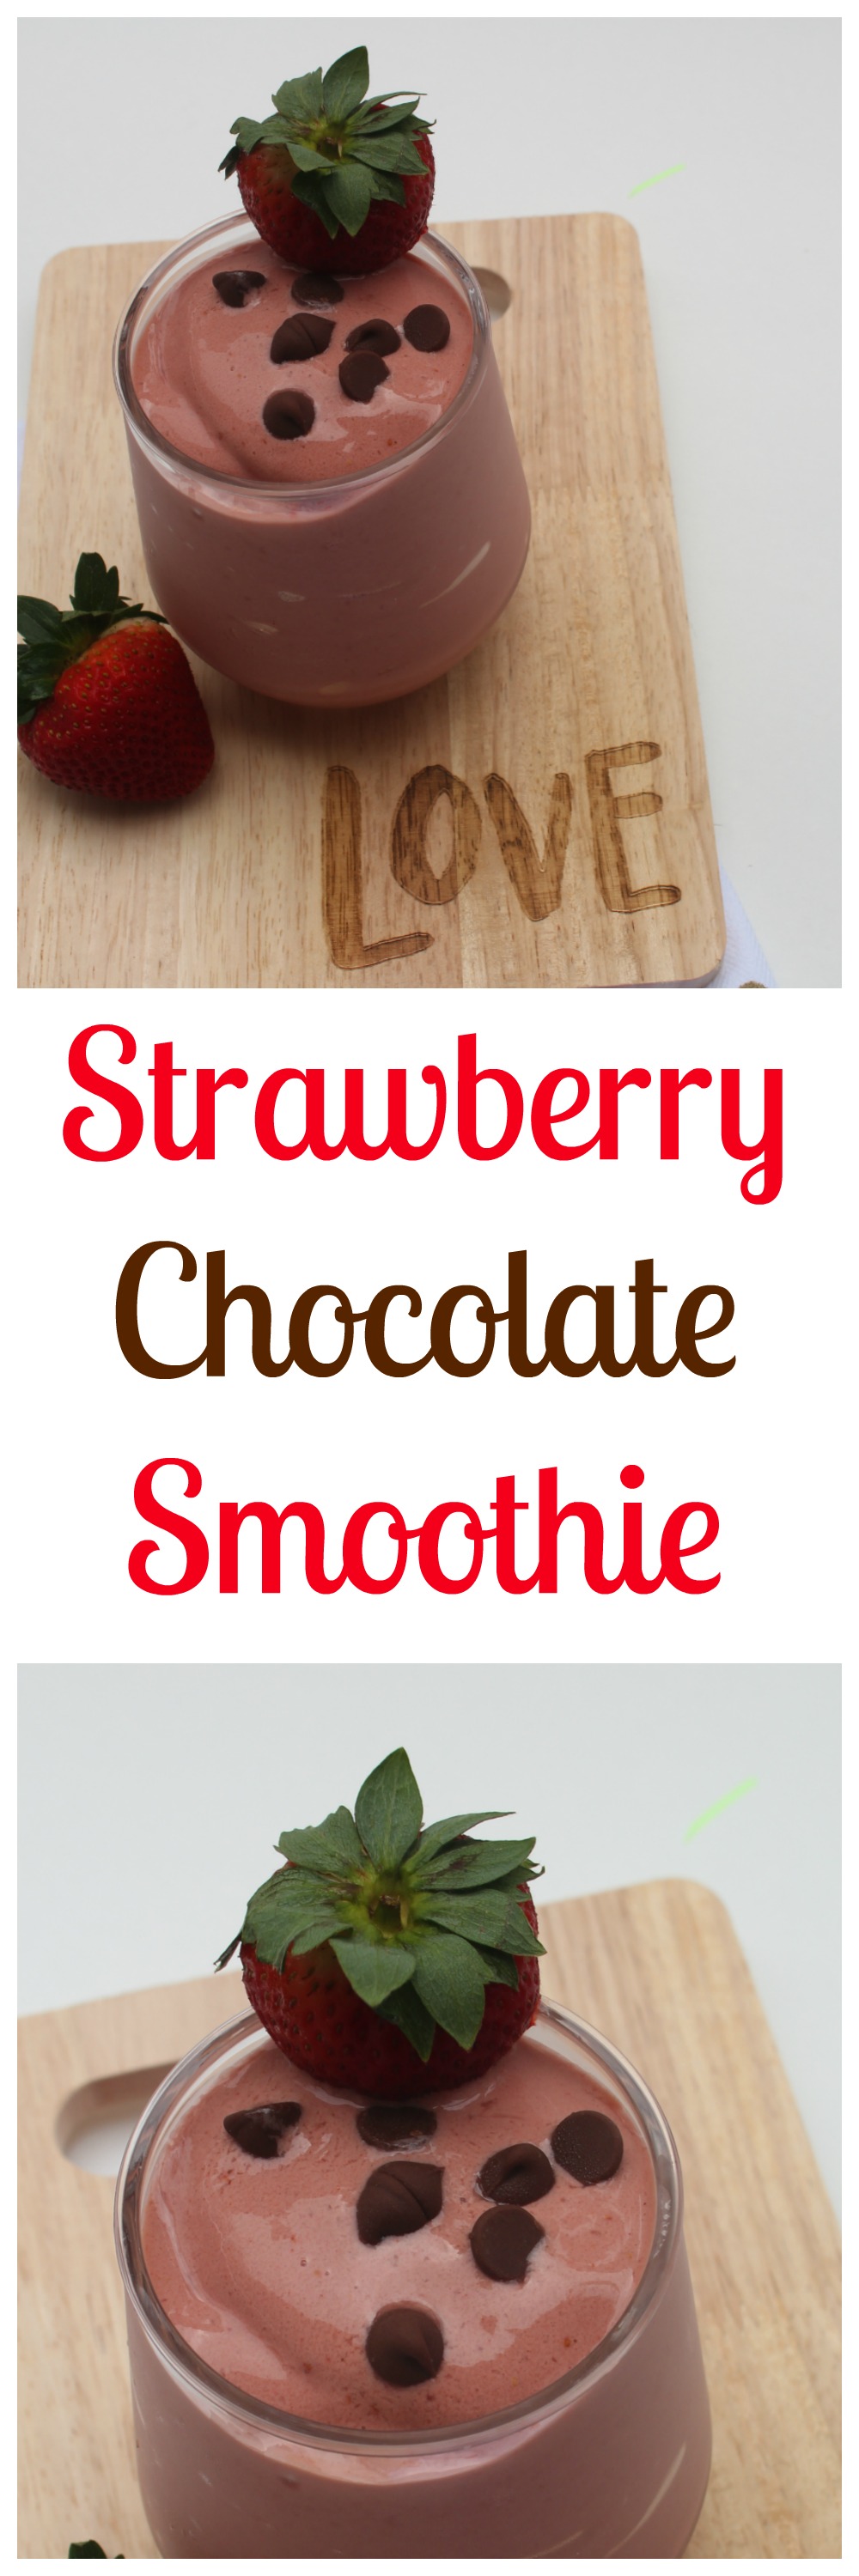 Strawberry Smoothie Recipes--These Strawberry Chocolate Smoothies are the perfect sweet and healthy treat on a hot summer day!